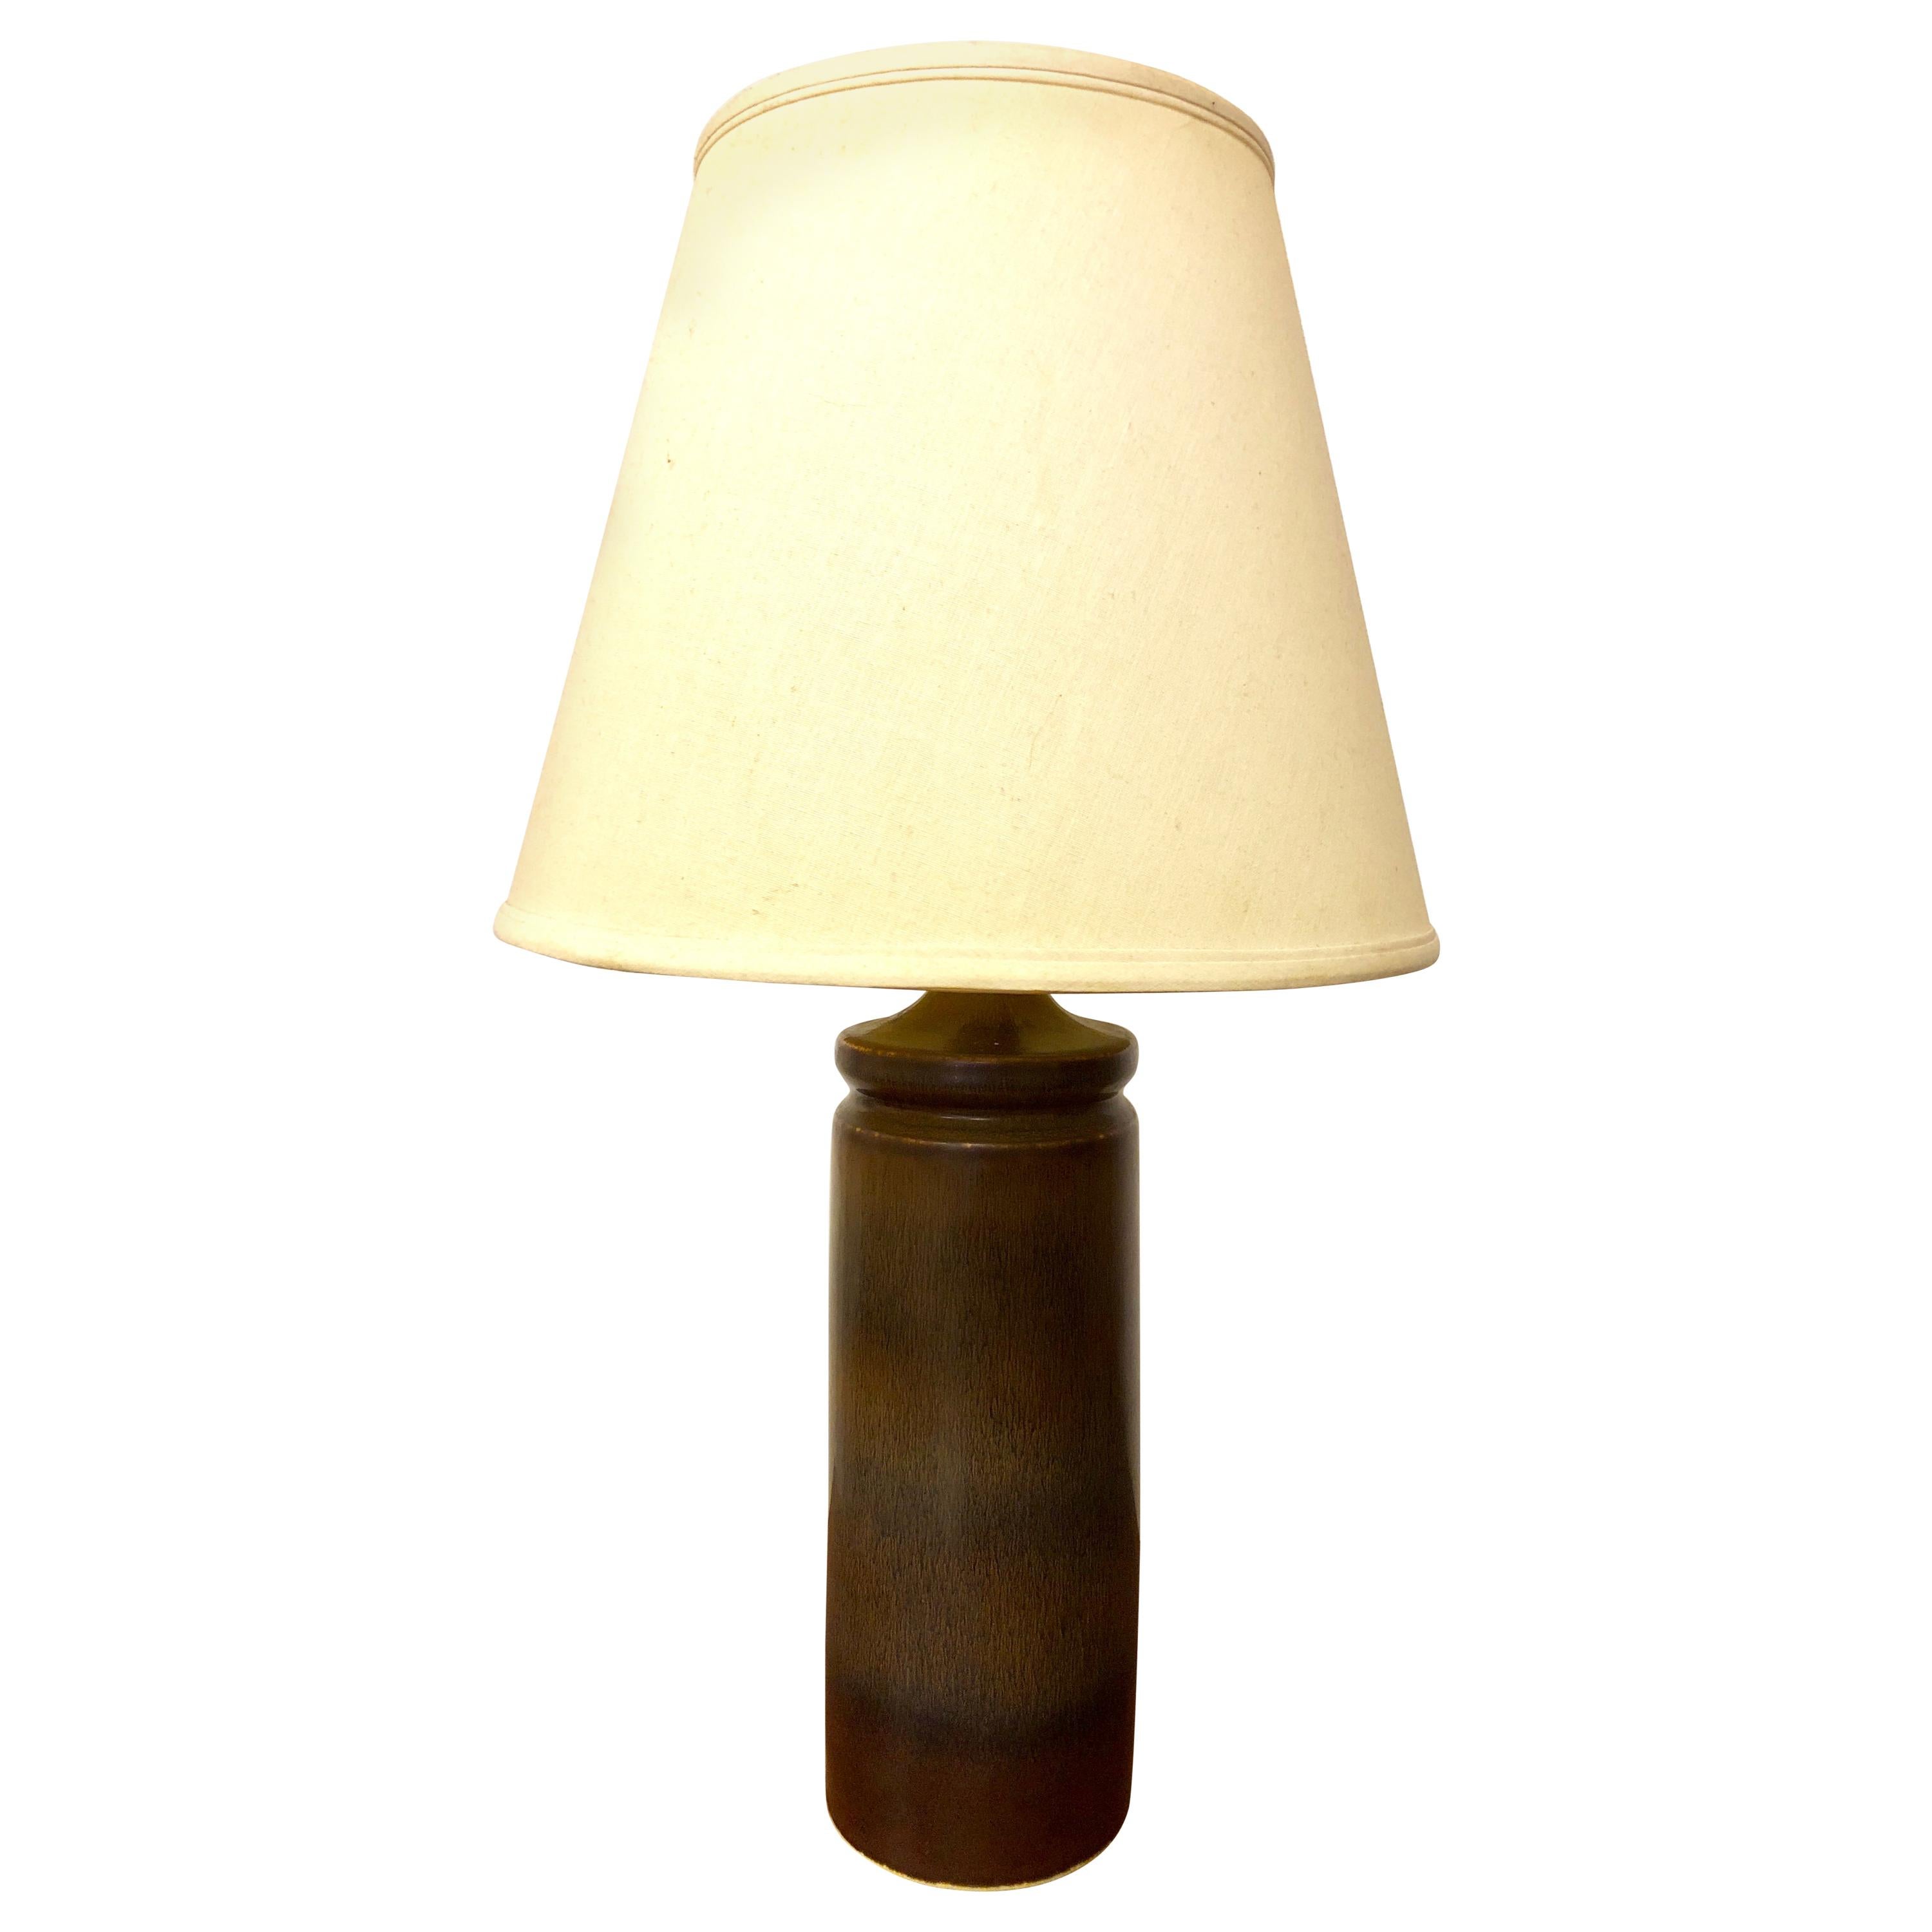 Carl Harry Stalhane Pottery Lamp For Sale